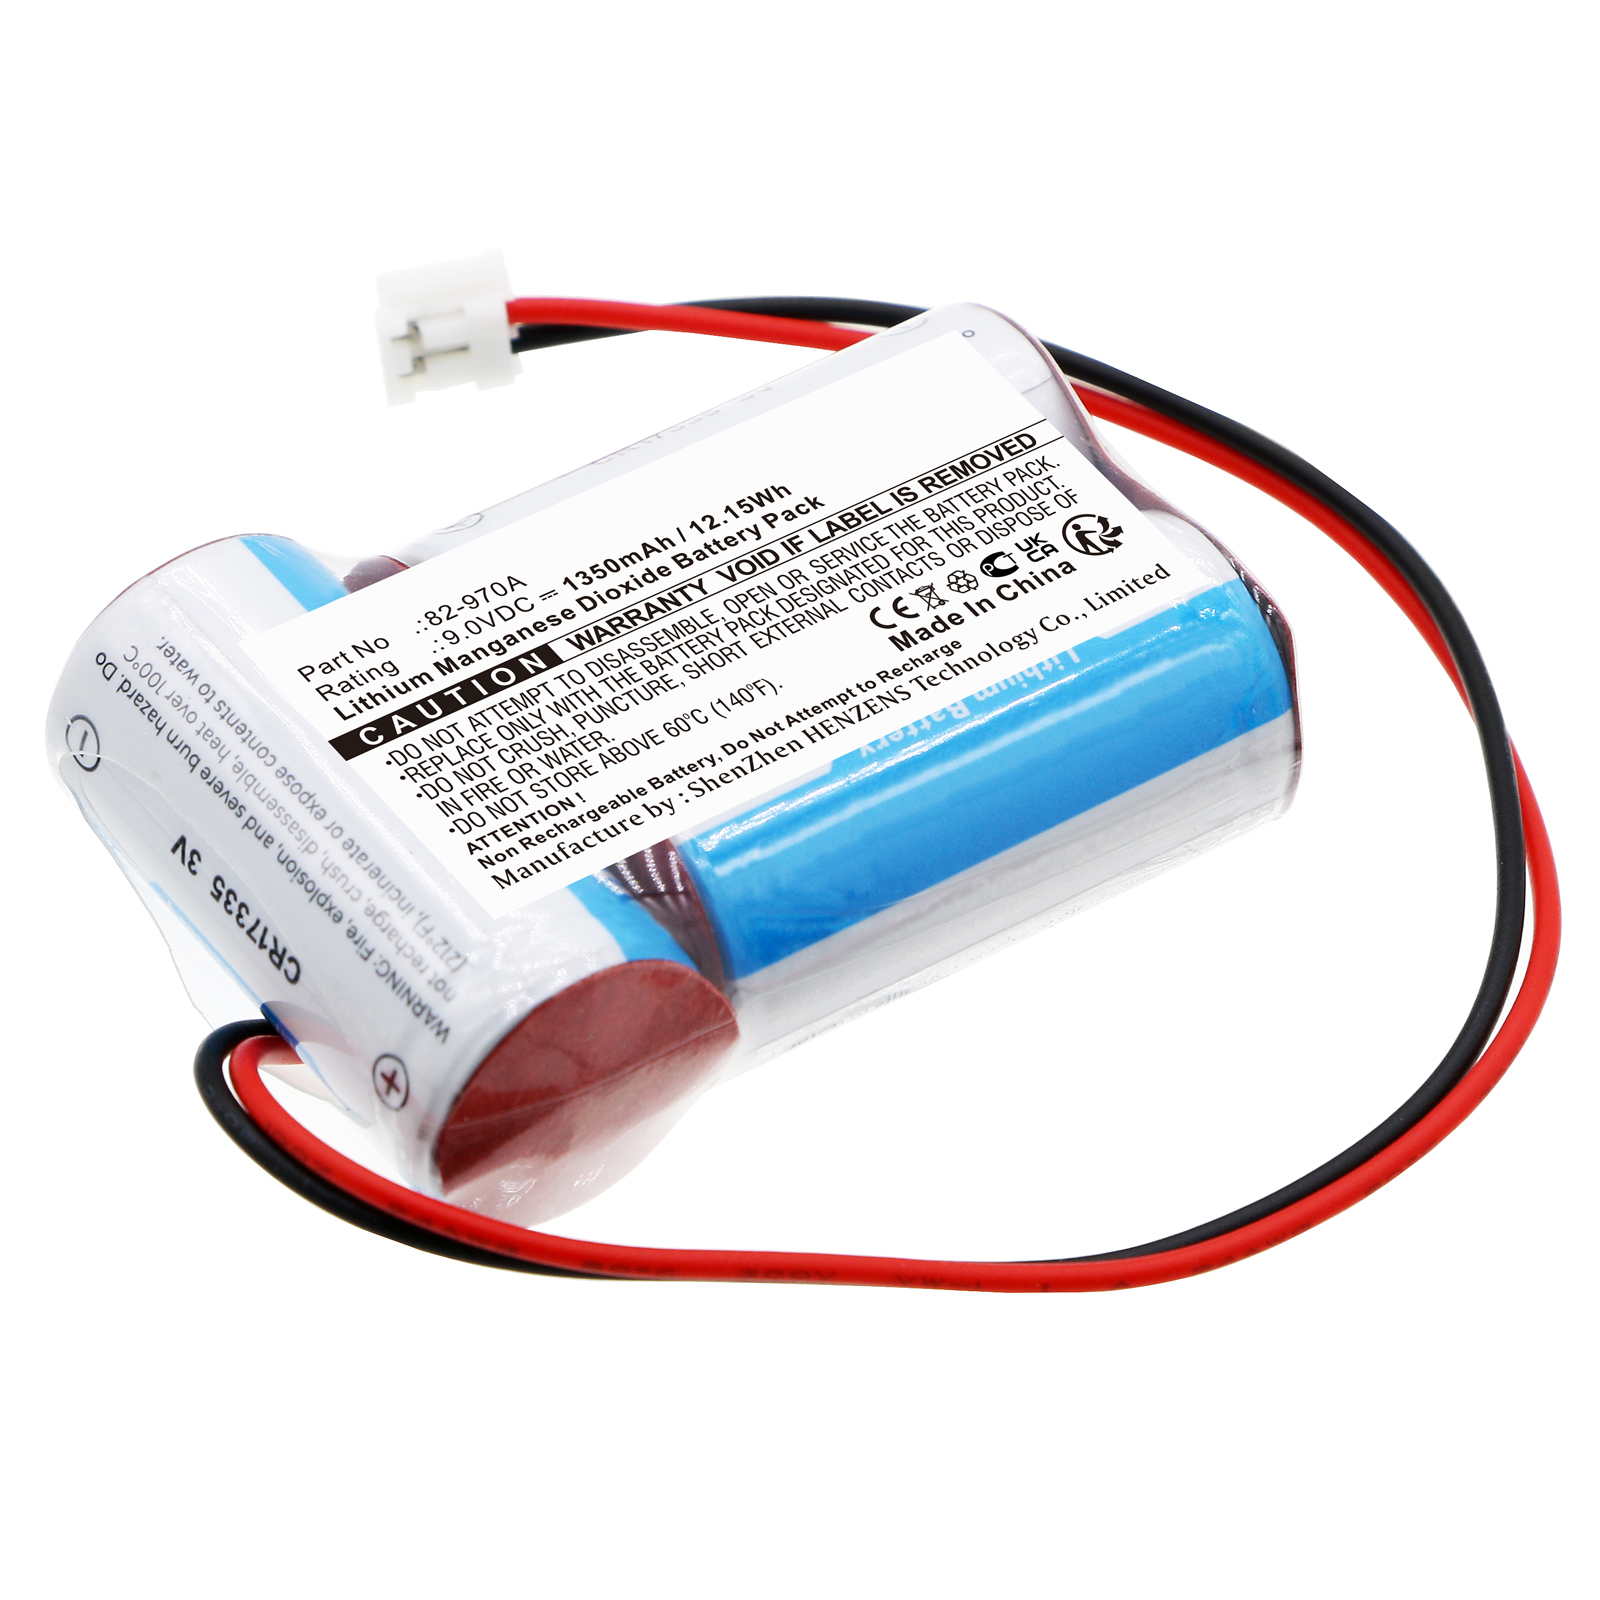 Synergy Digital Marine Safety & Flotation Devices Battery, Compatible with Mcmurdo 82-939D Marine Safety & Flotation Devices Battery (Li-MnO2, 9V, 1350mAh)